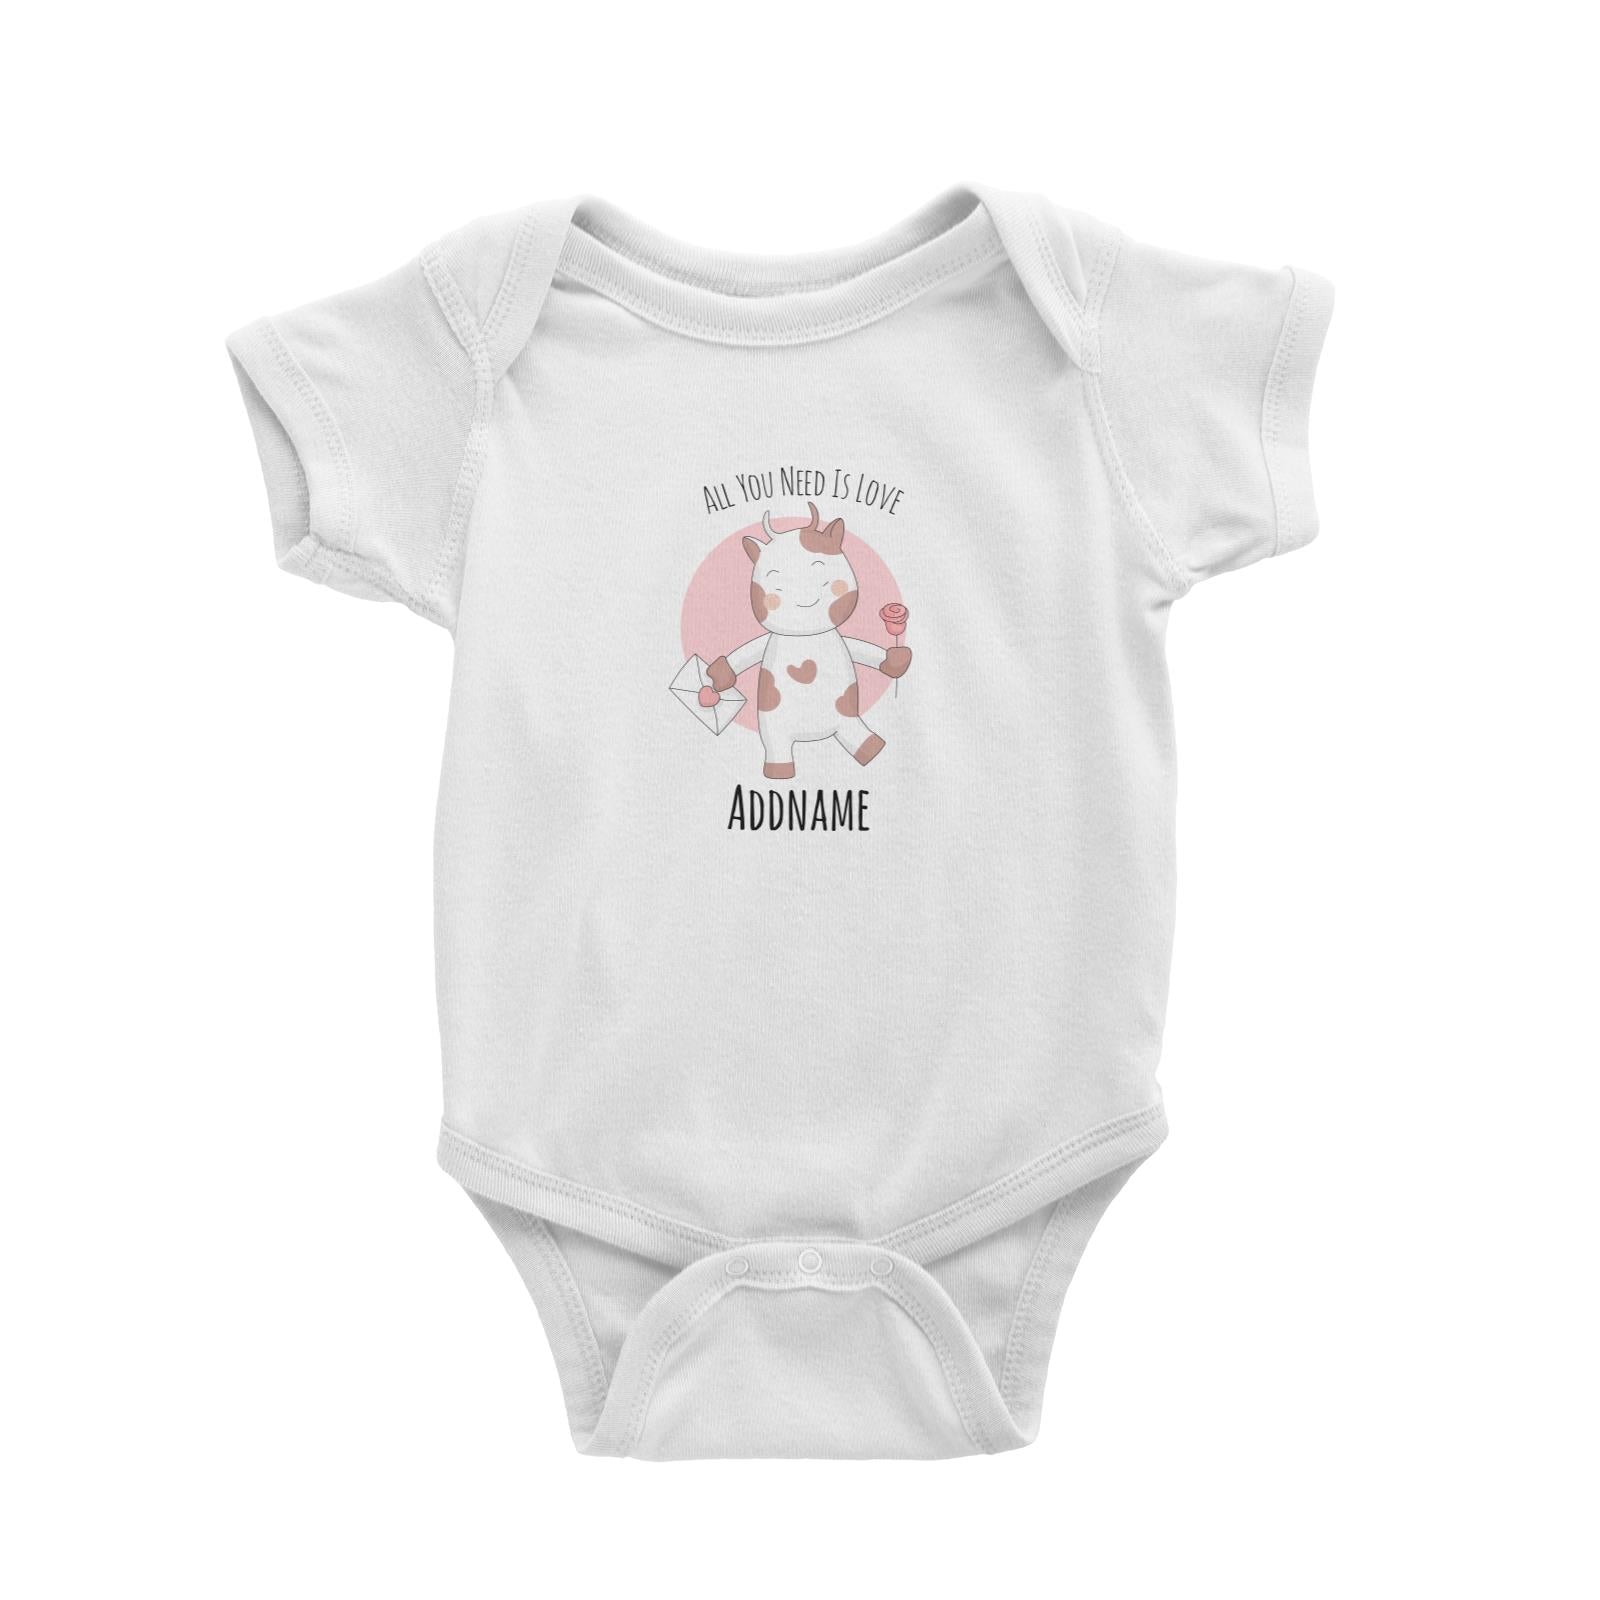 Sweet Animals Sketches Cow All You Need Is Love Addname Baby Romper